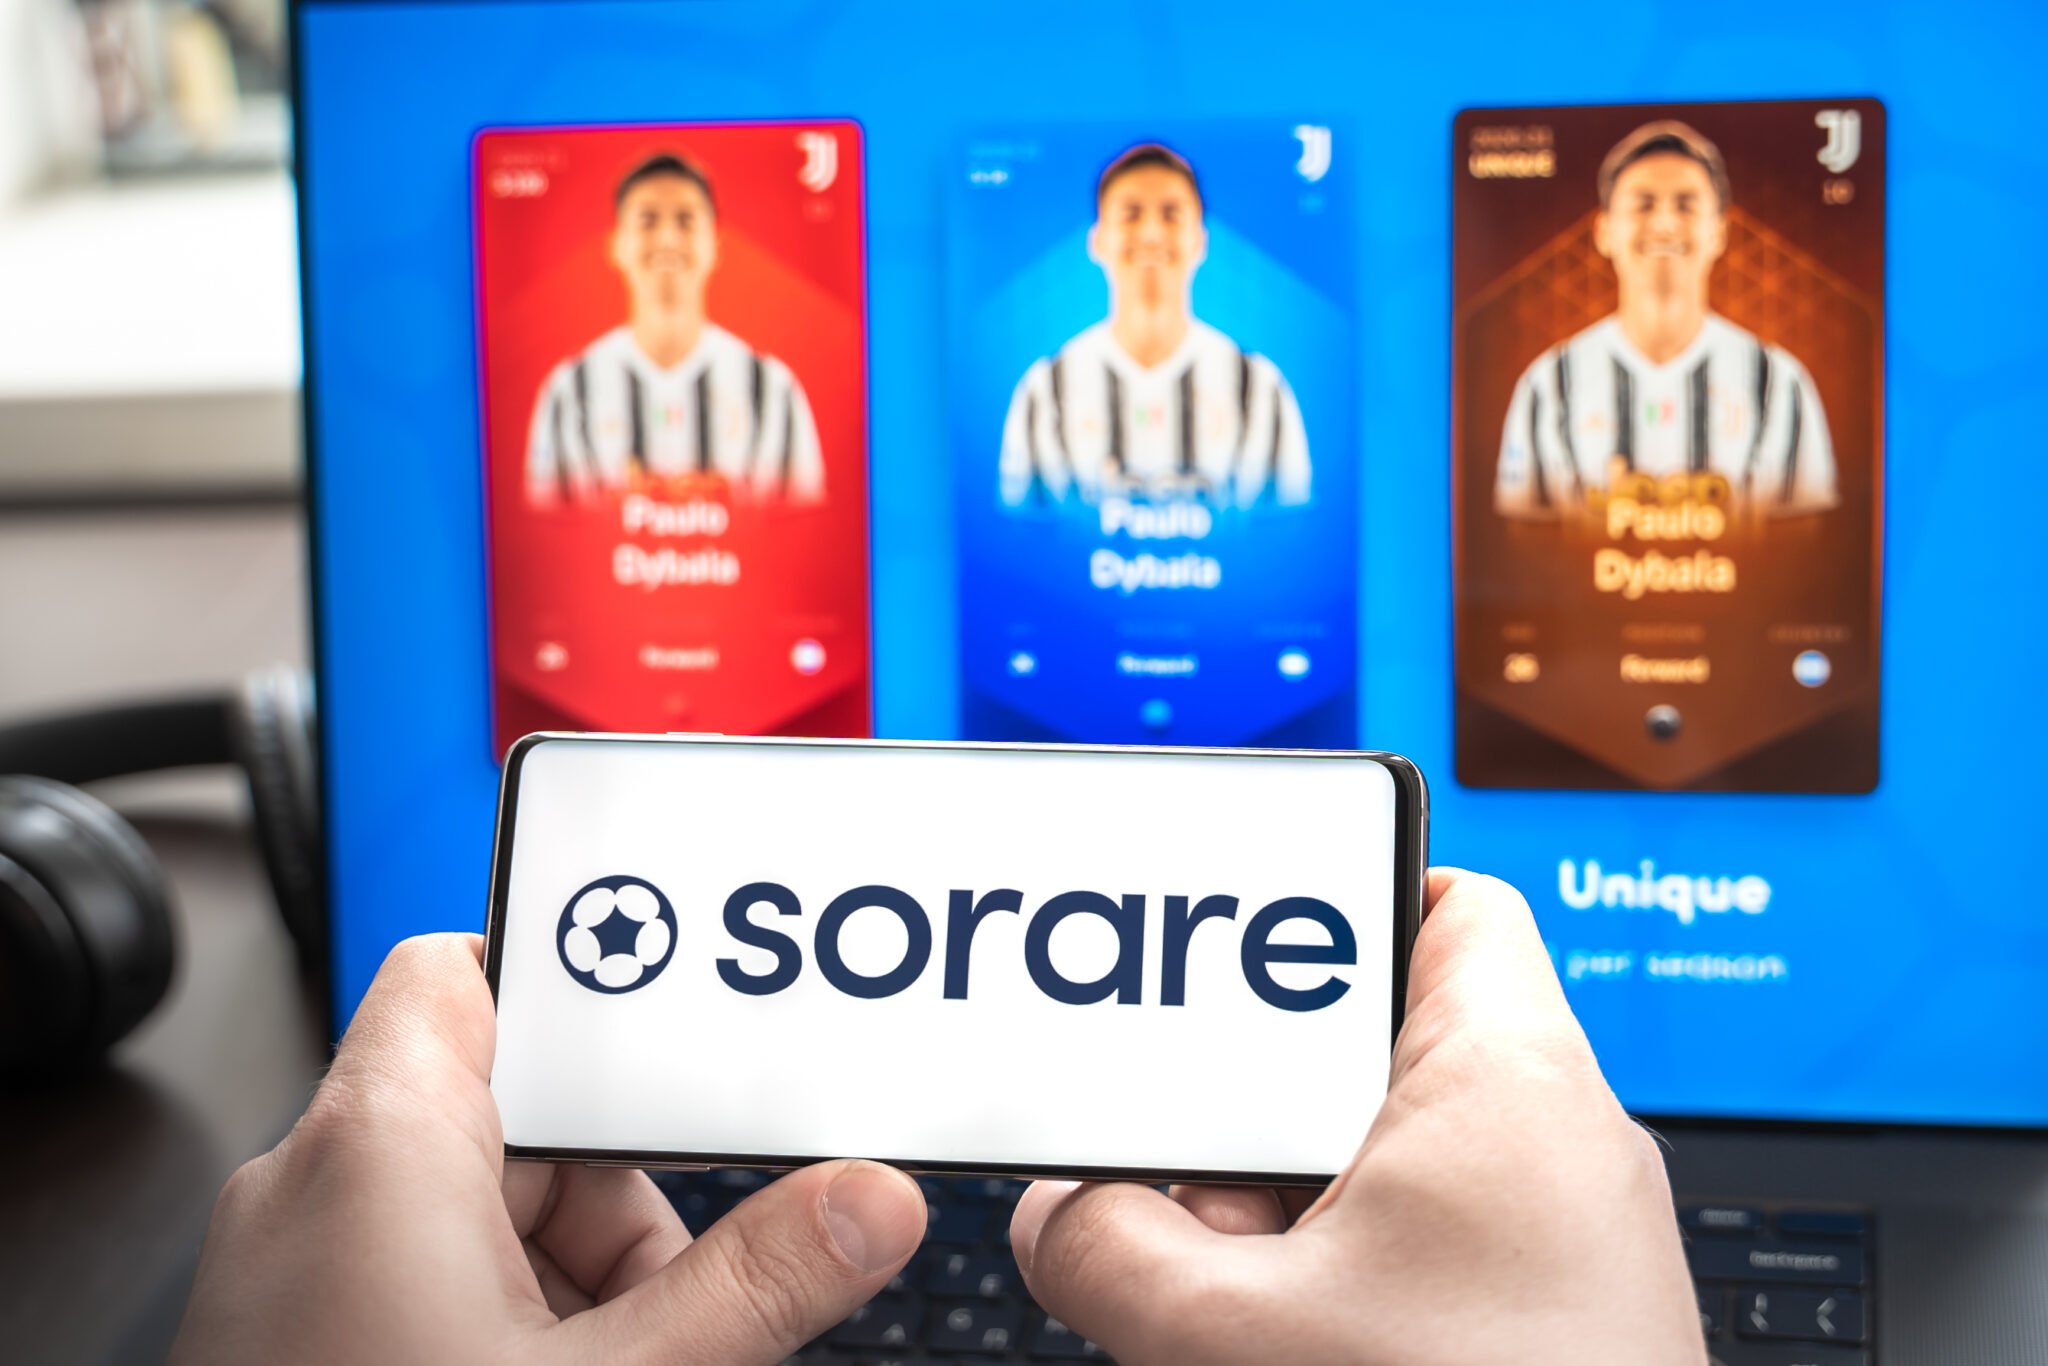 Russia Moscow 30.05.2021.Logo,screenshot of blockchain nft ethereum cryptocurrency sport football, soccer game Sorare in laptop,mobile phone.Man playing,collecting cards Earning digital money at home.